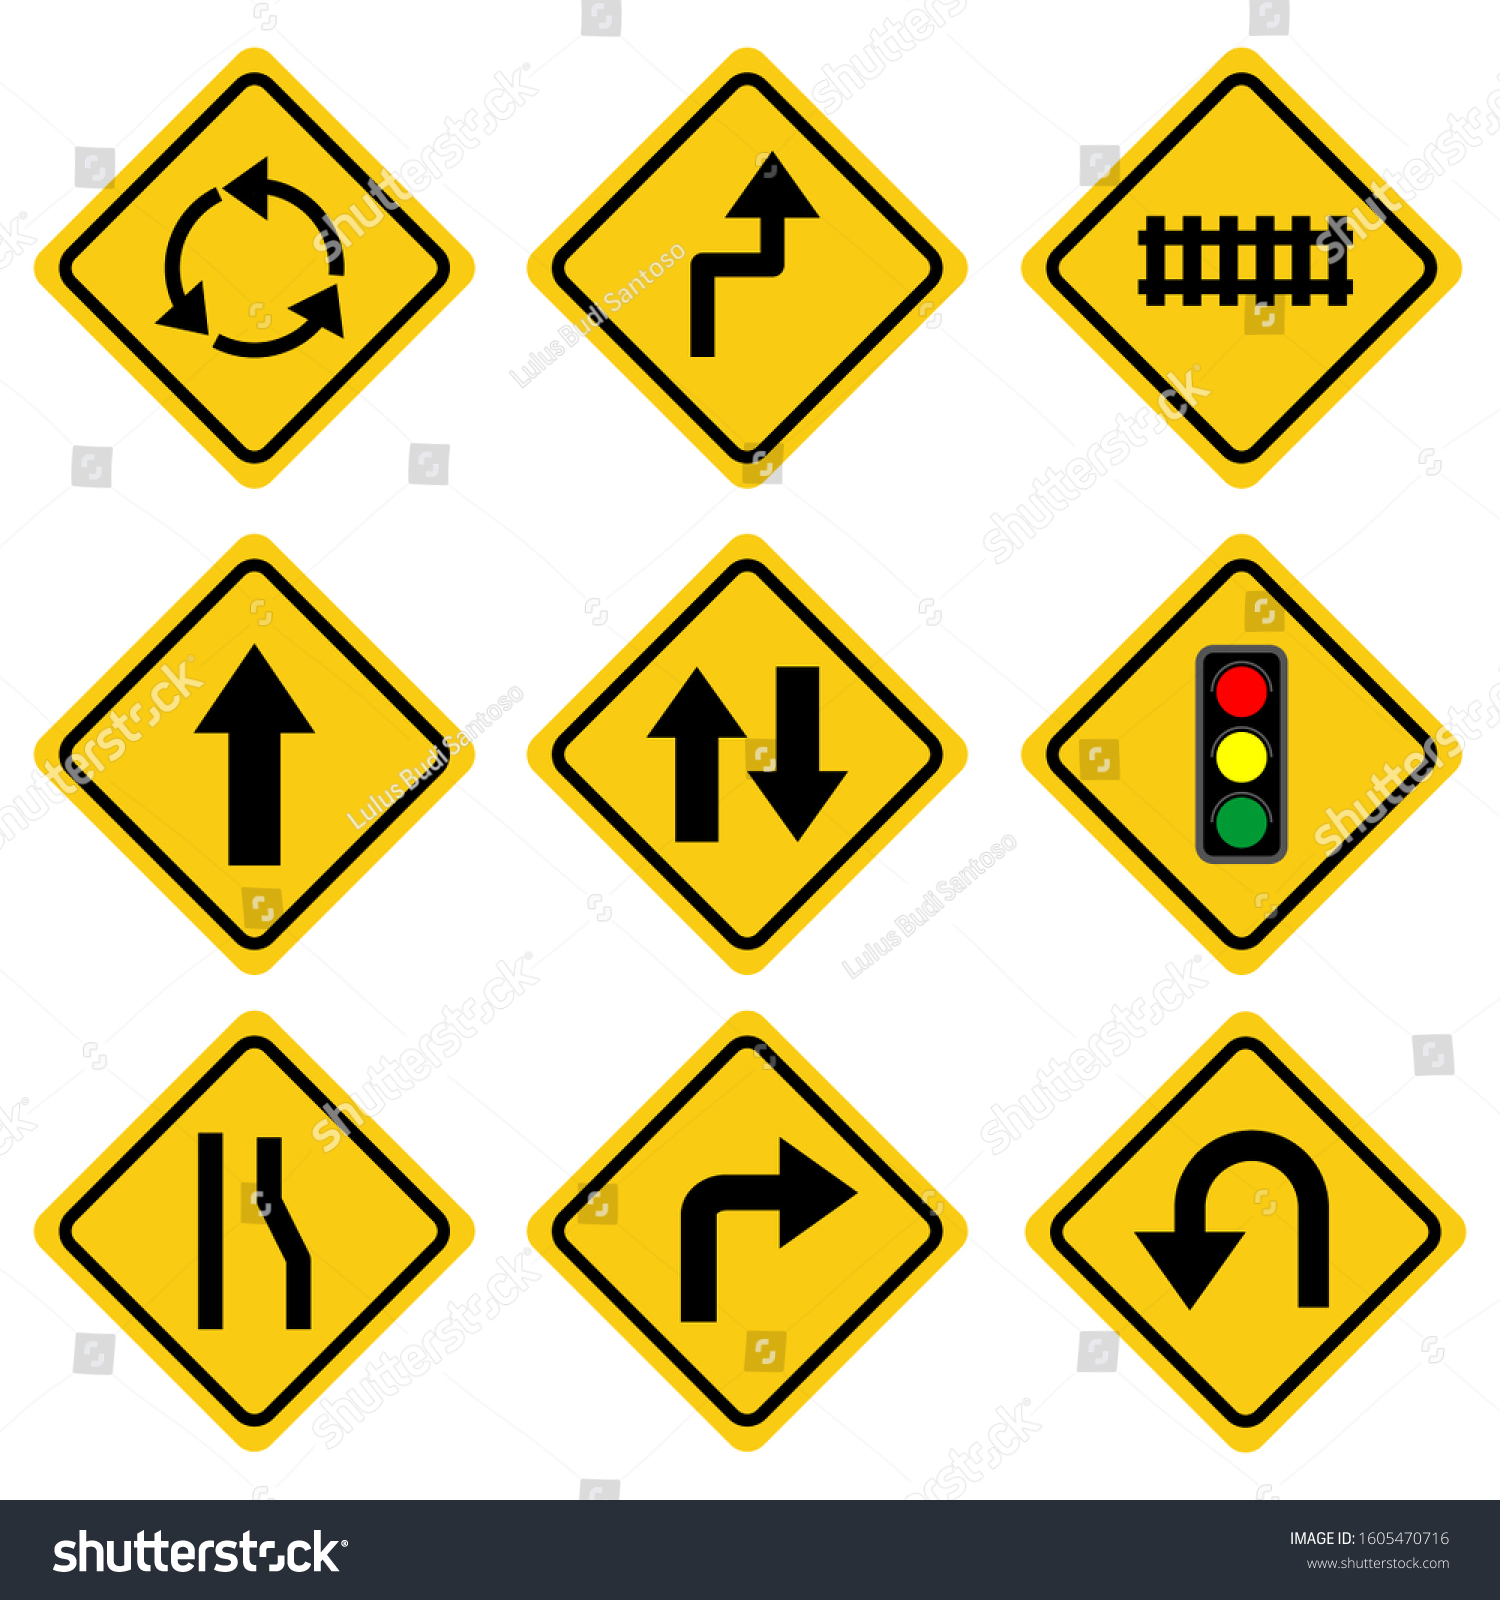 Yellow road signs, vector traffic signs arranged - Royalty Free Stock ...